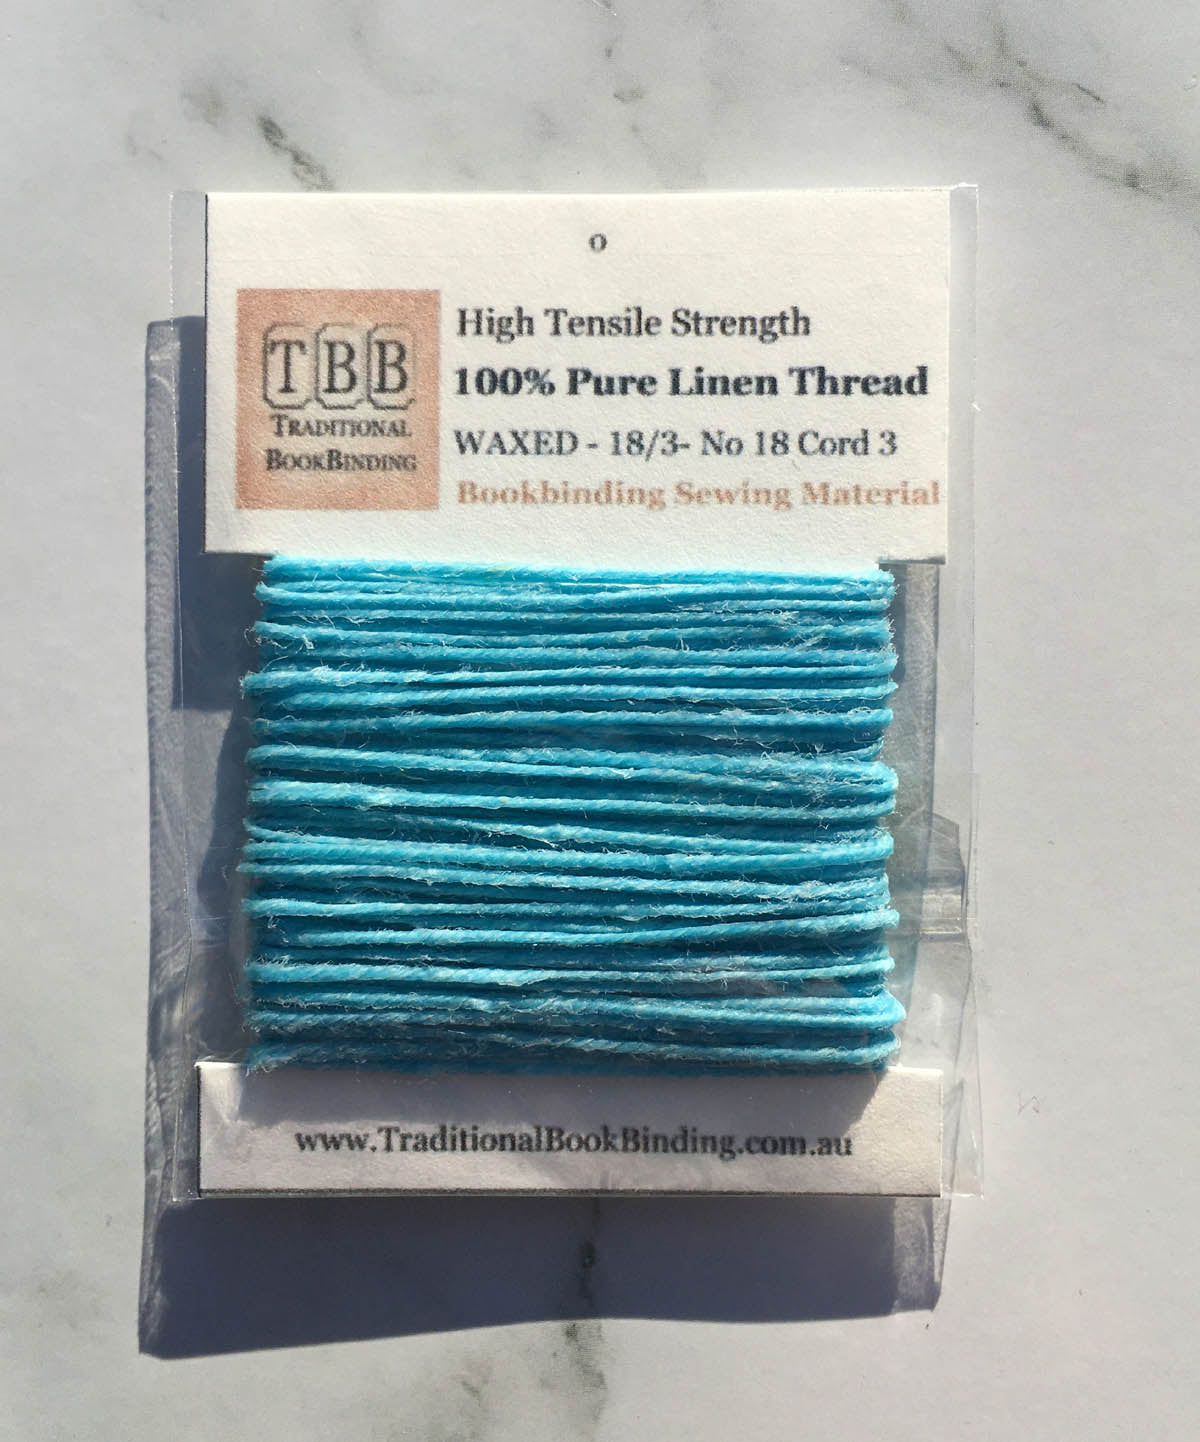 SKY BLUE- 100% Pure Linen Thread- Waxed- 18/3 No.18 Cord 3- Approx 0.55mm thick